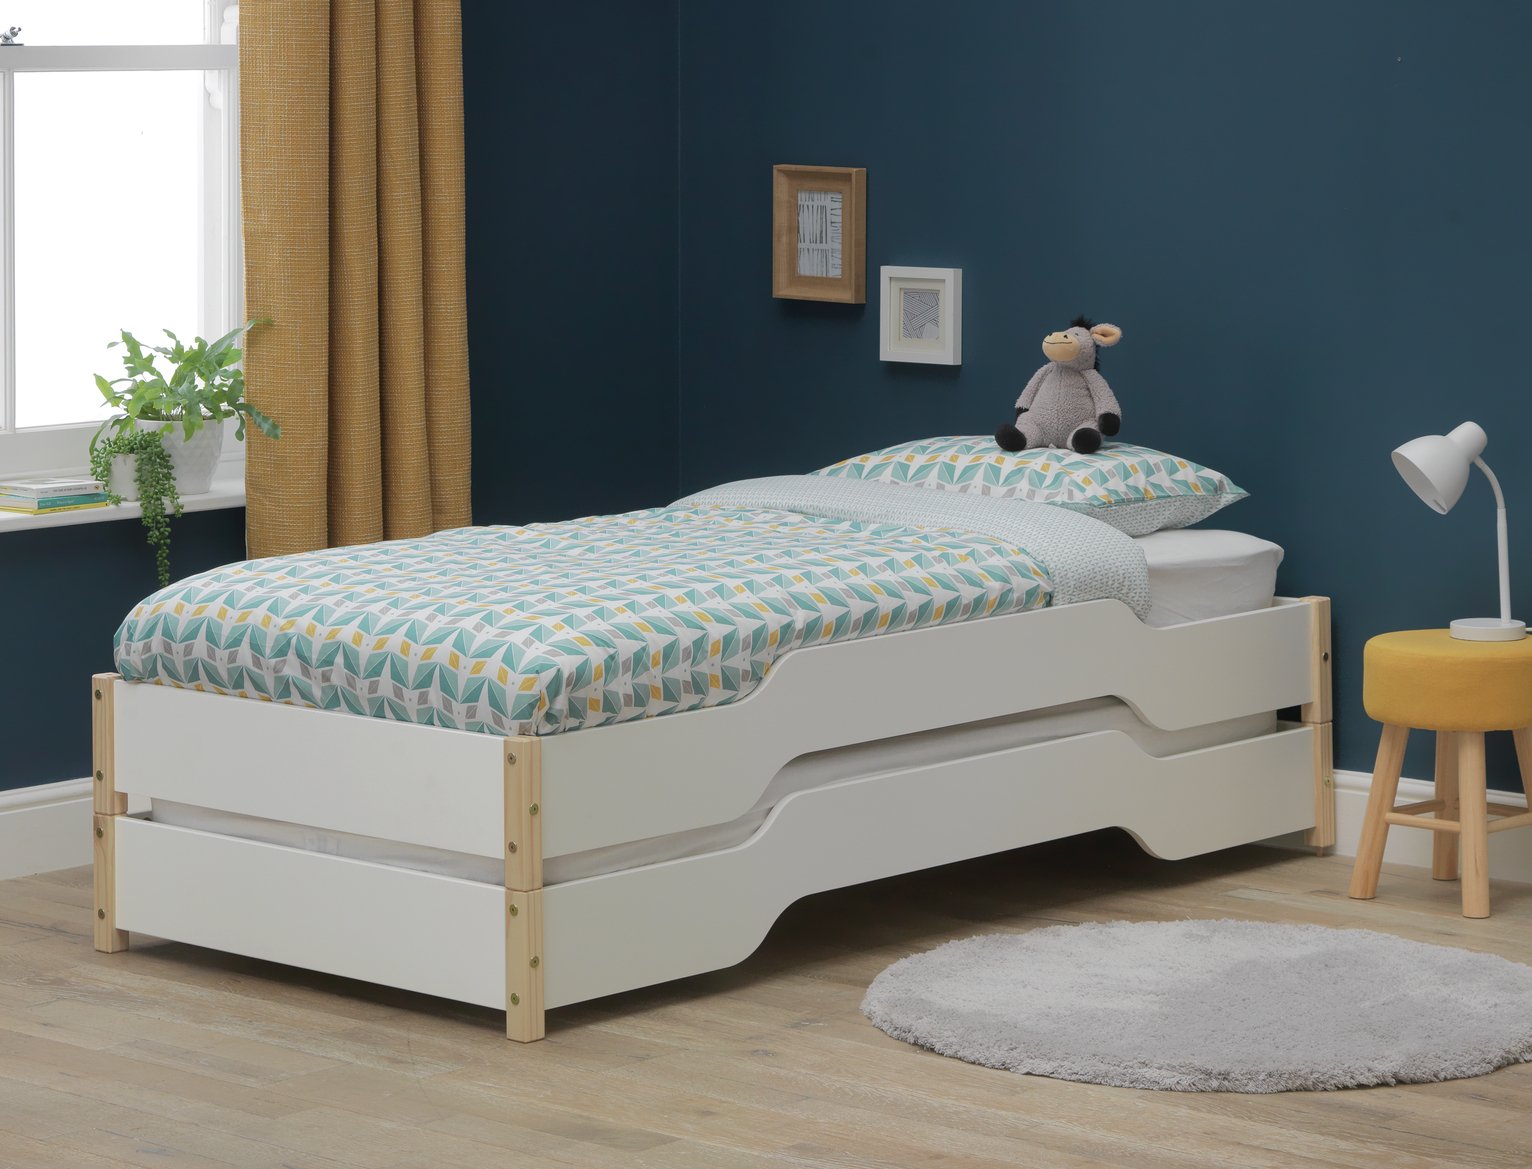 Habitat Hanna Stacking Single Guest Bed with Mattresses